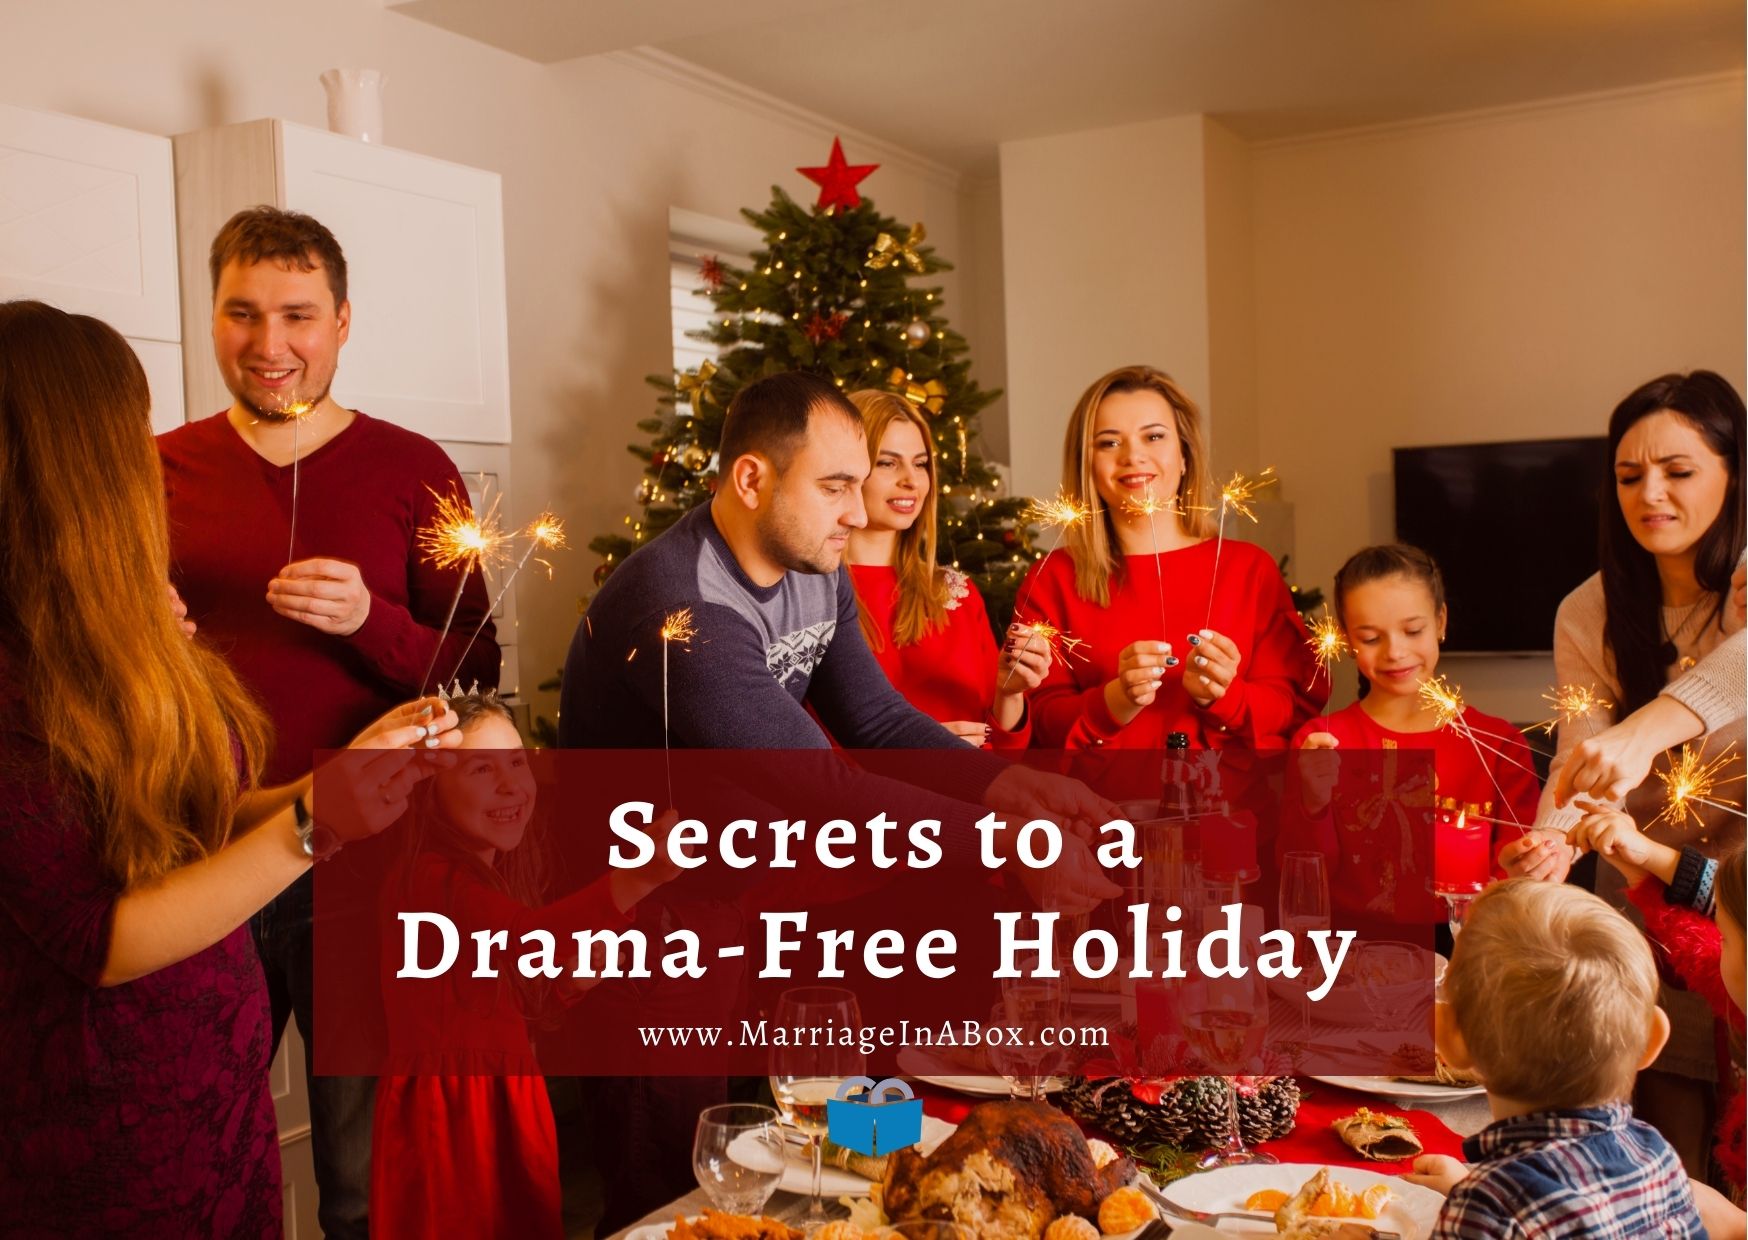 Marriage in a Box: Secrets to a Drama-Free Holiday